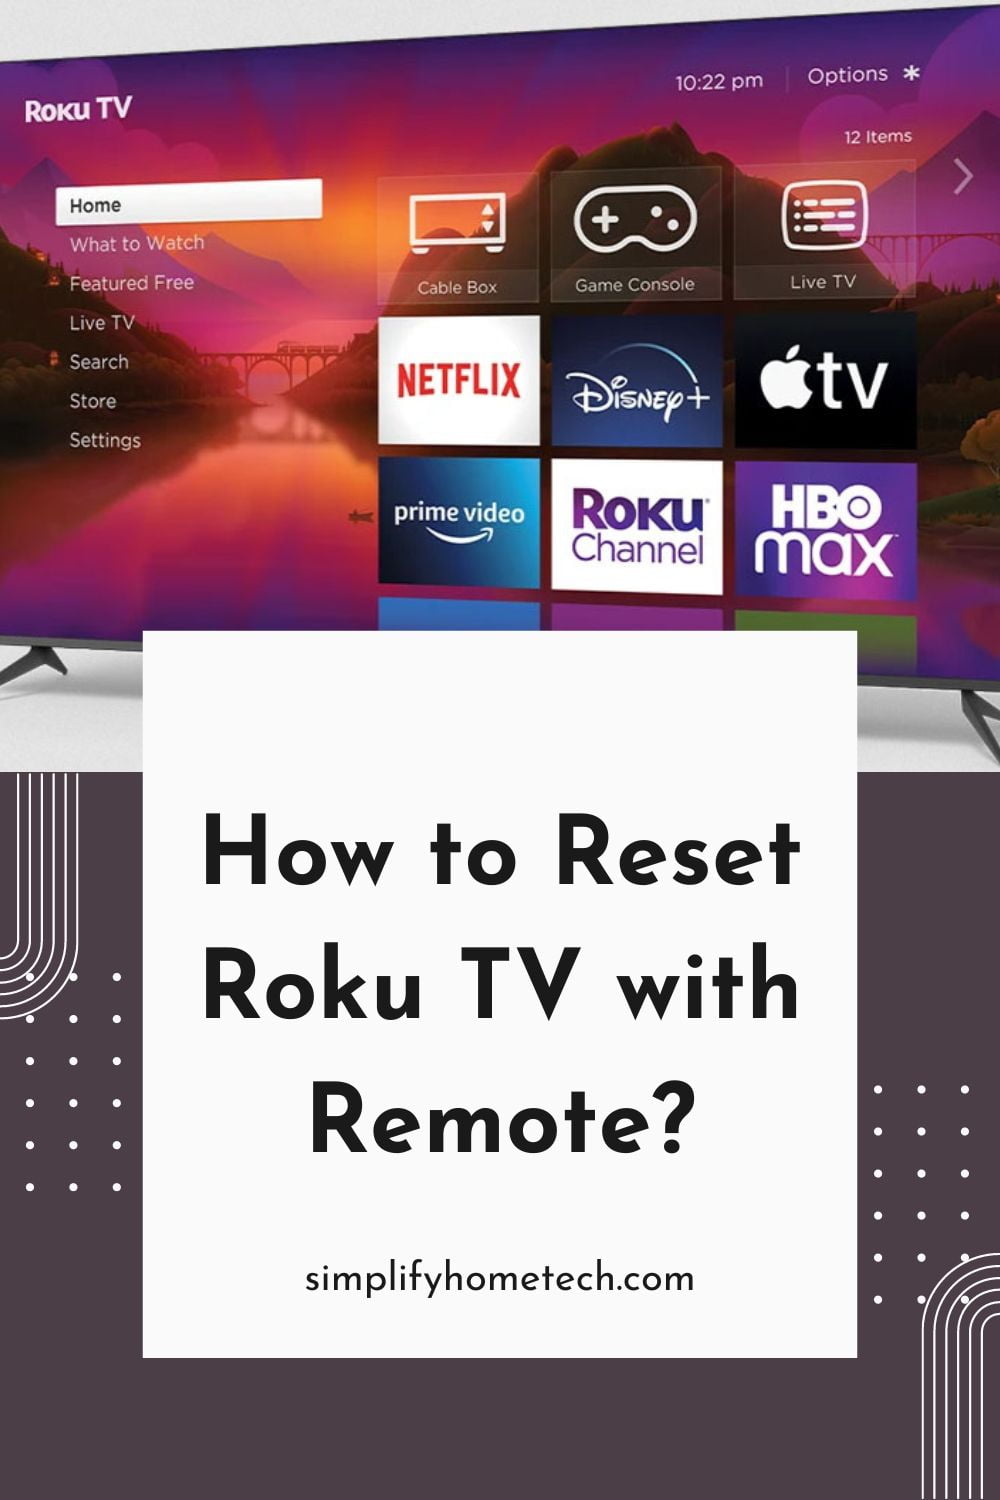 How to Reset Roku TV with Remote?